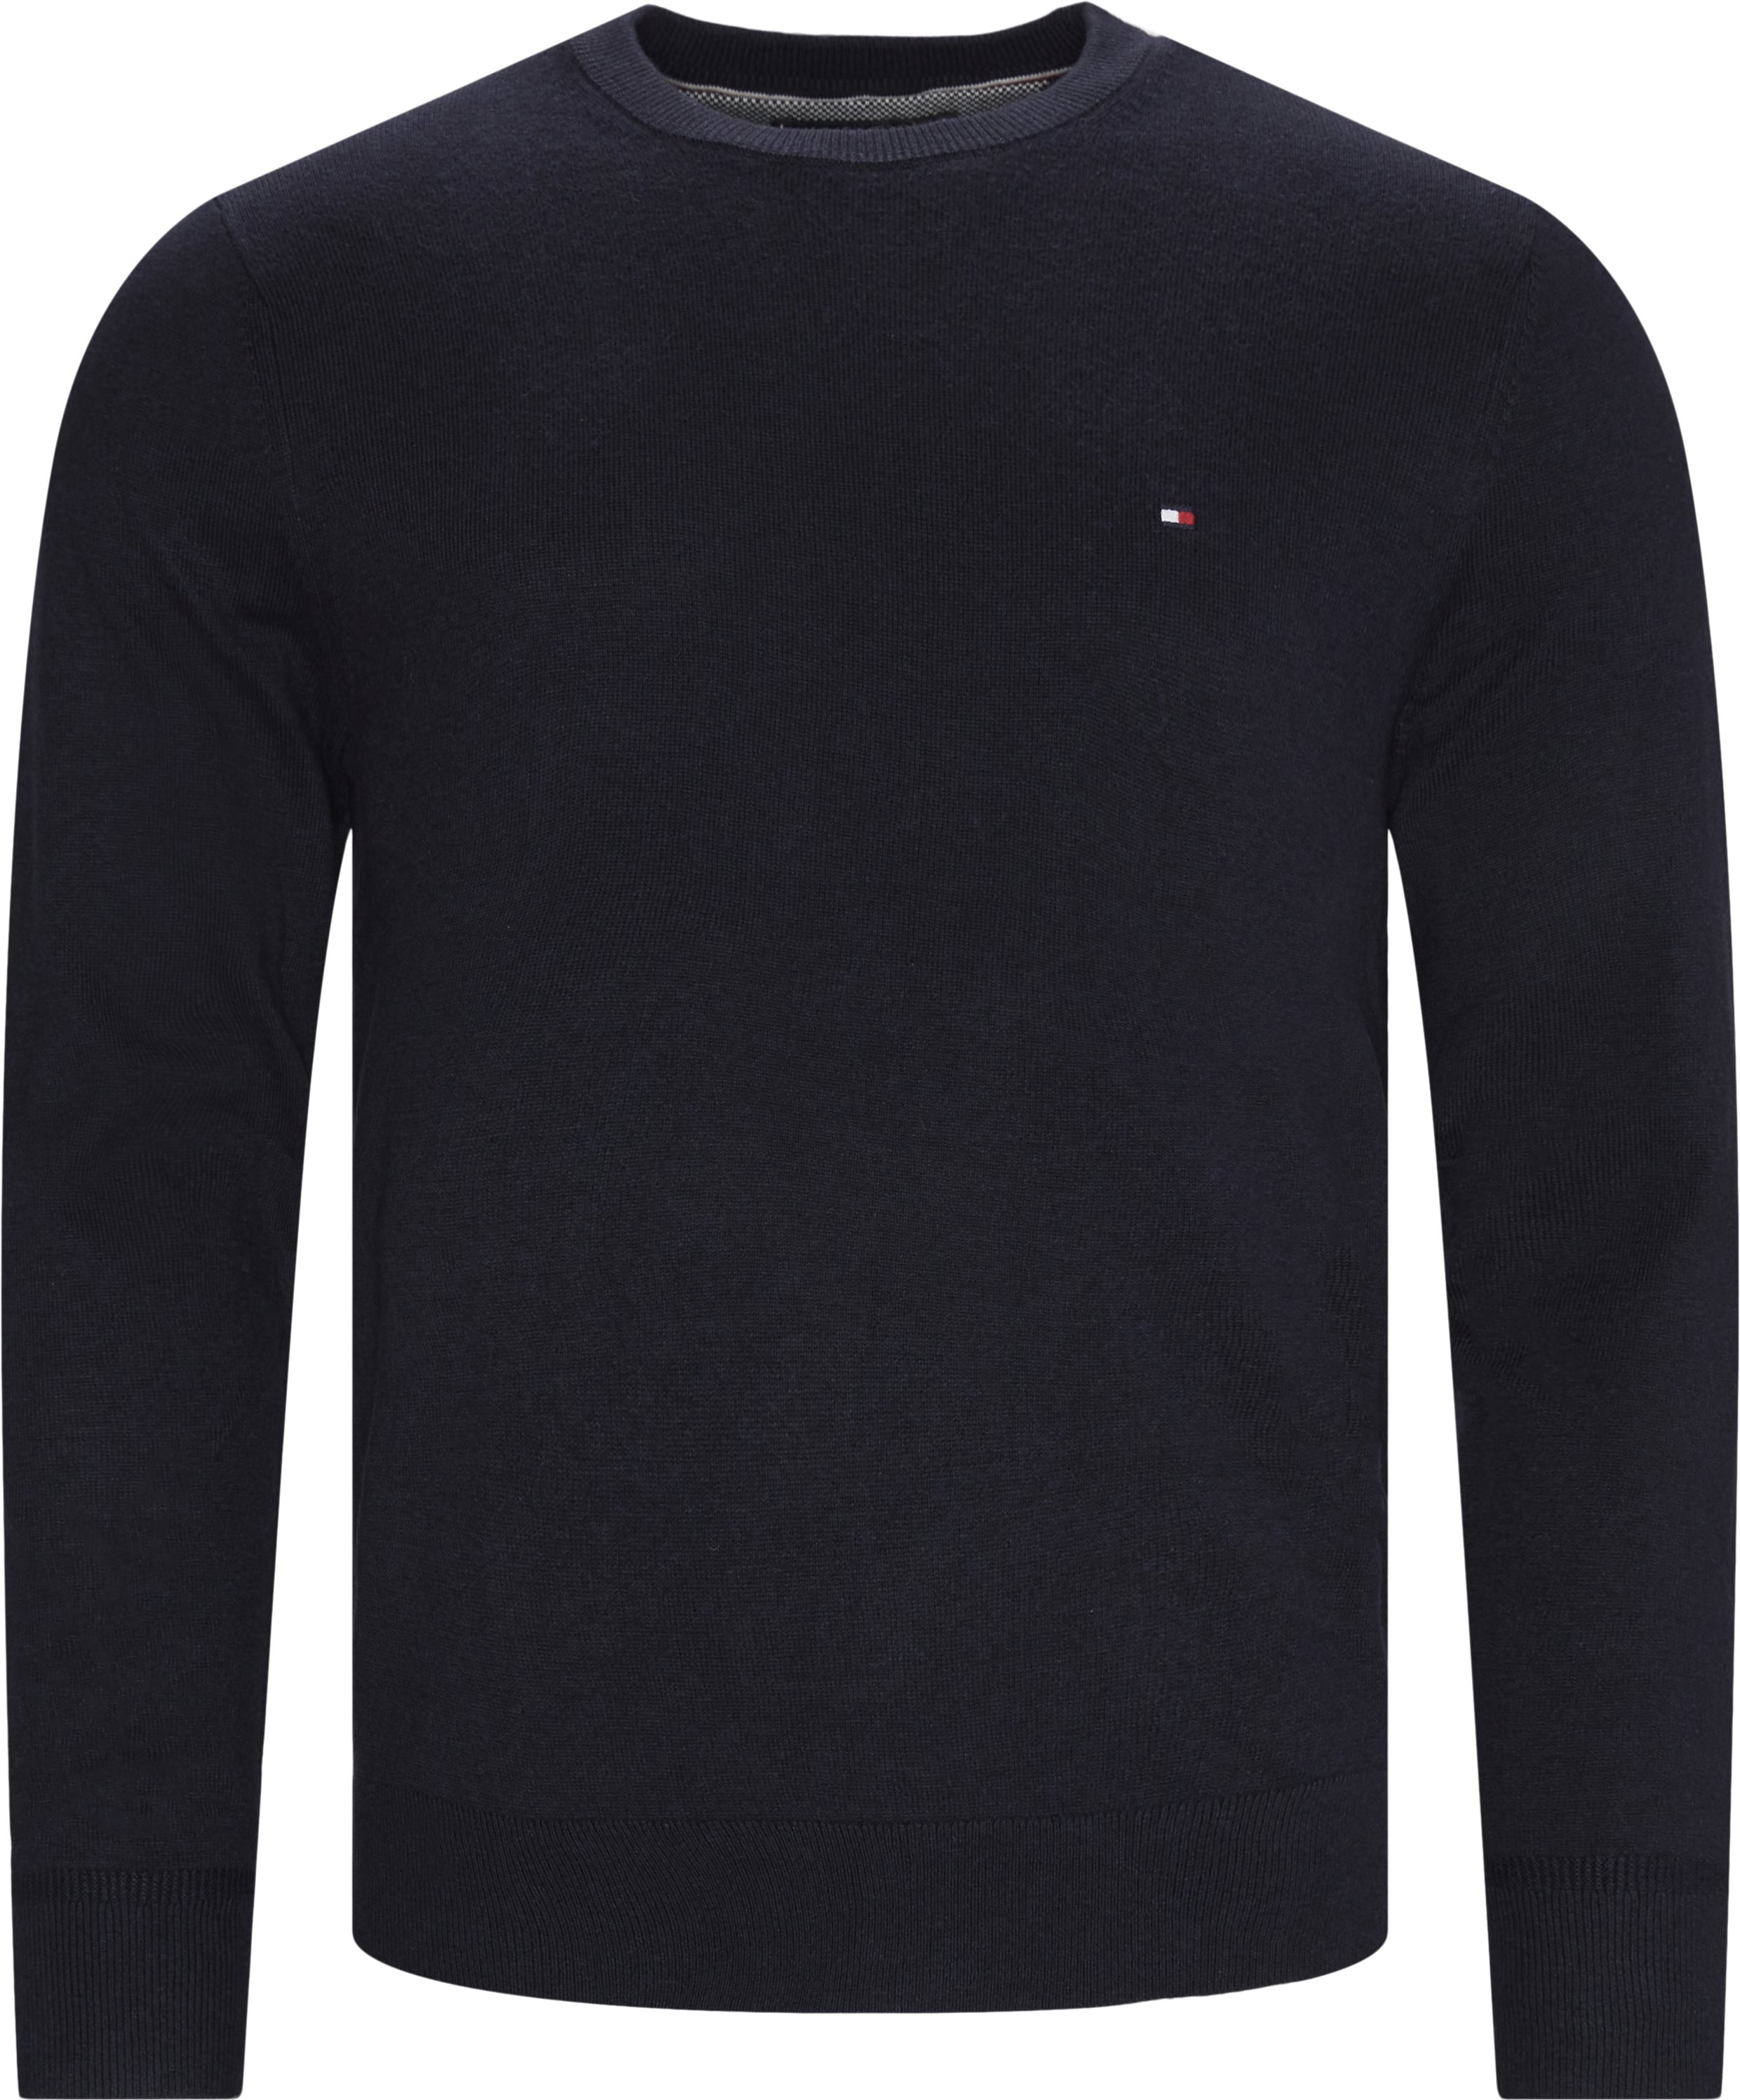 60 PIMA 11674 NAVY from Tommy CASHMERE EUR COTTON Knitwear Hilfiger